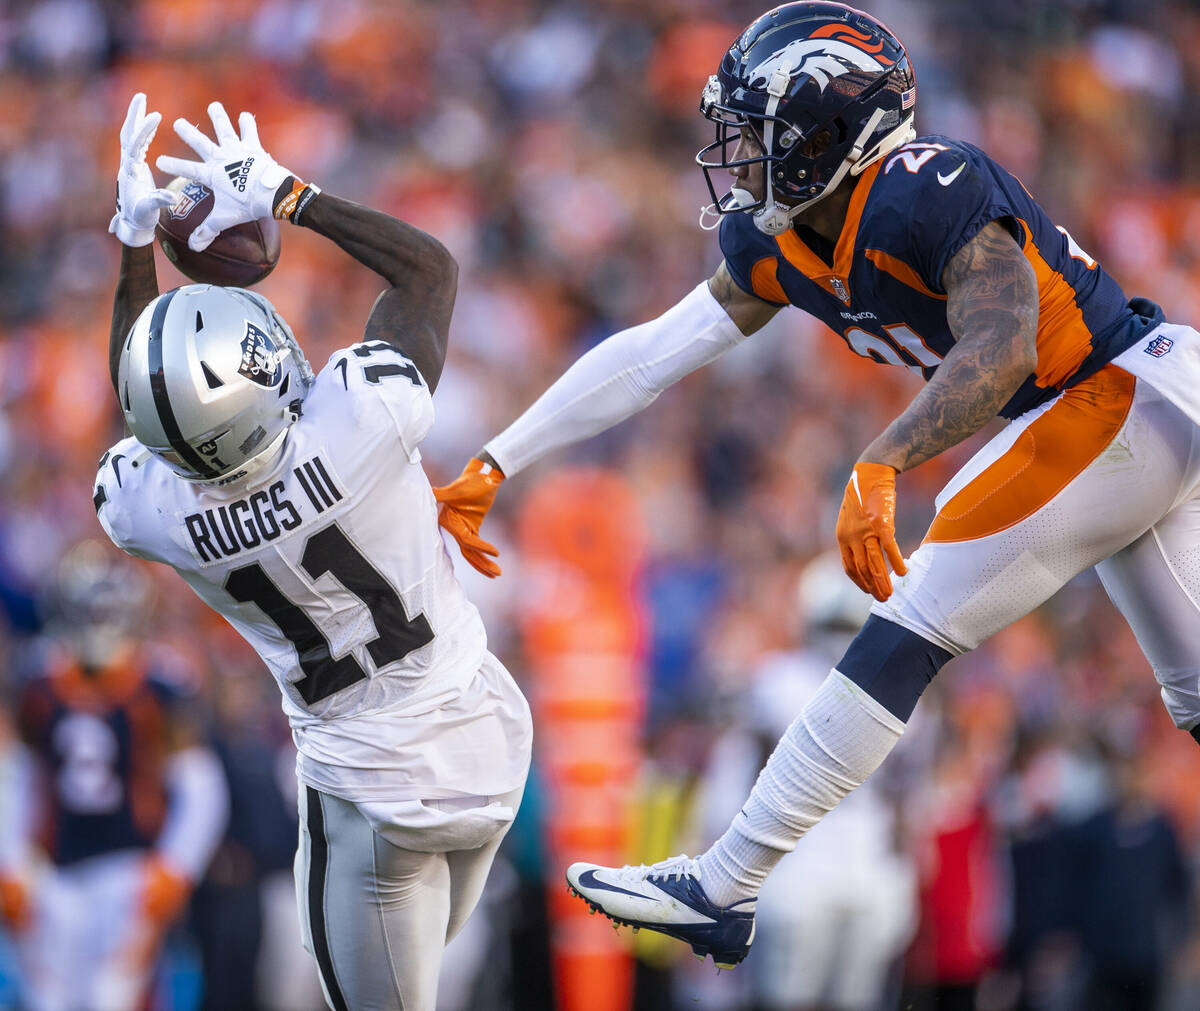 Raiders' wide receiver Henry Ruggs III (11) looks in a long pass over Denver Broncos cornerback ...